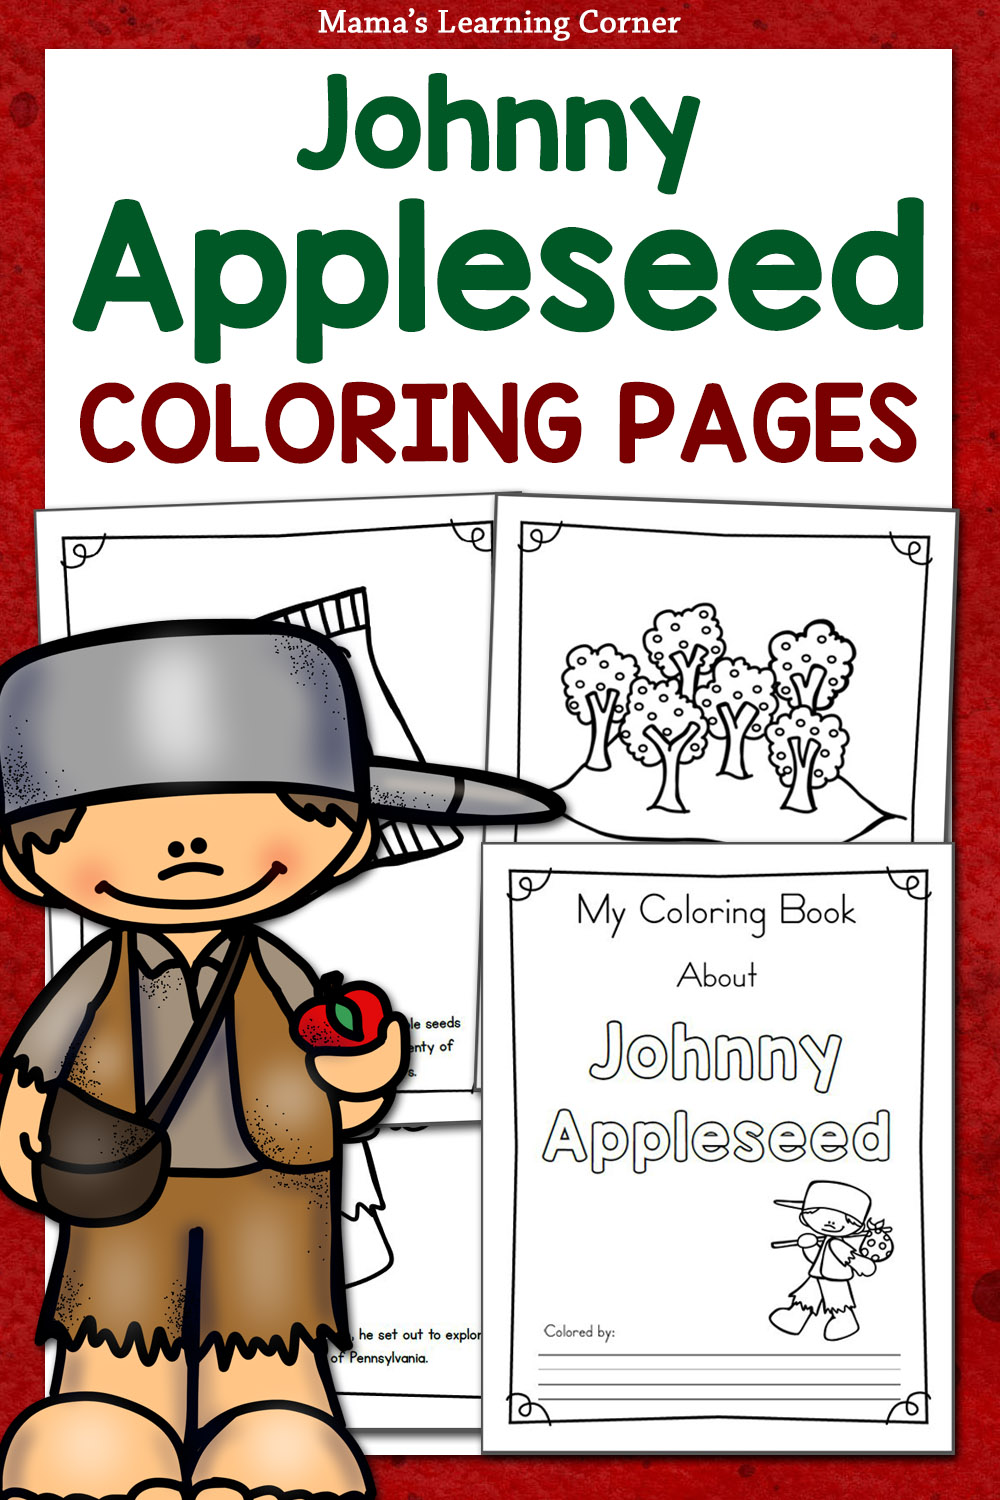 johnny-appleseed-coloring-pages-for-kids